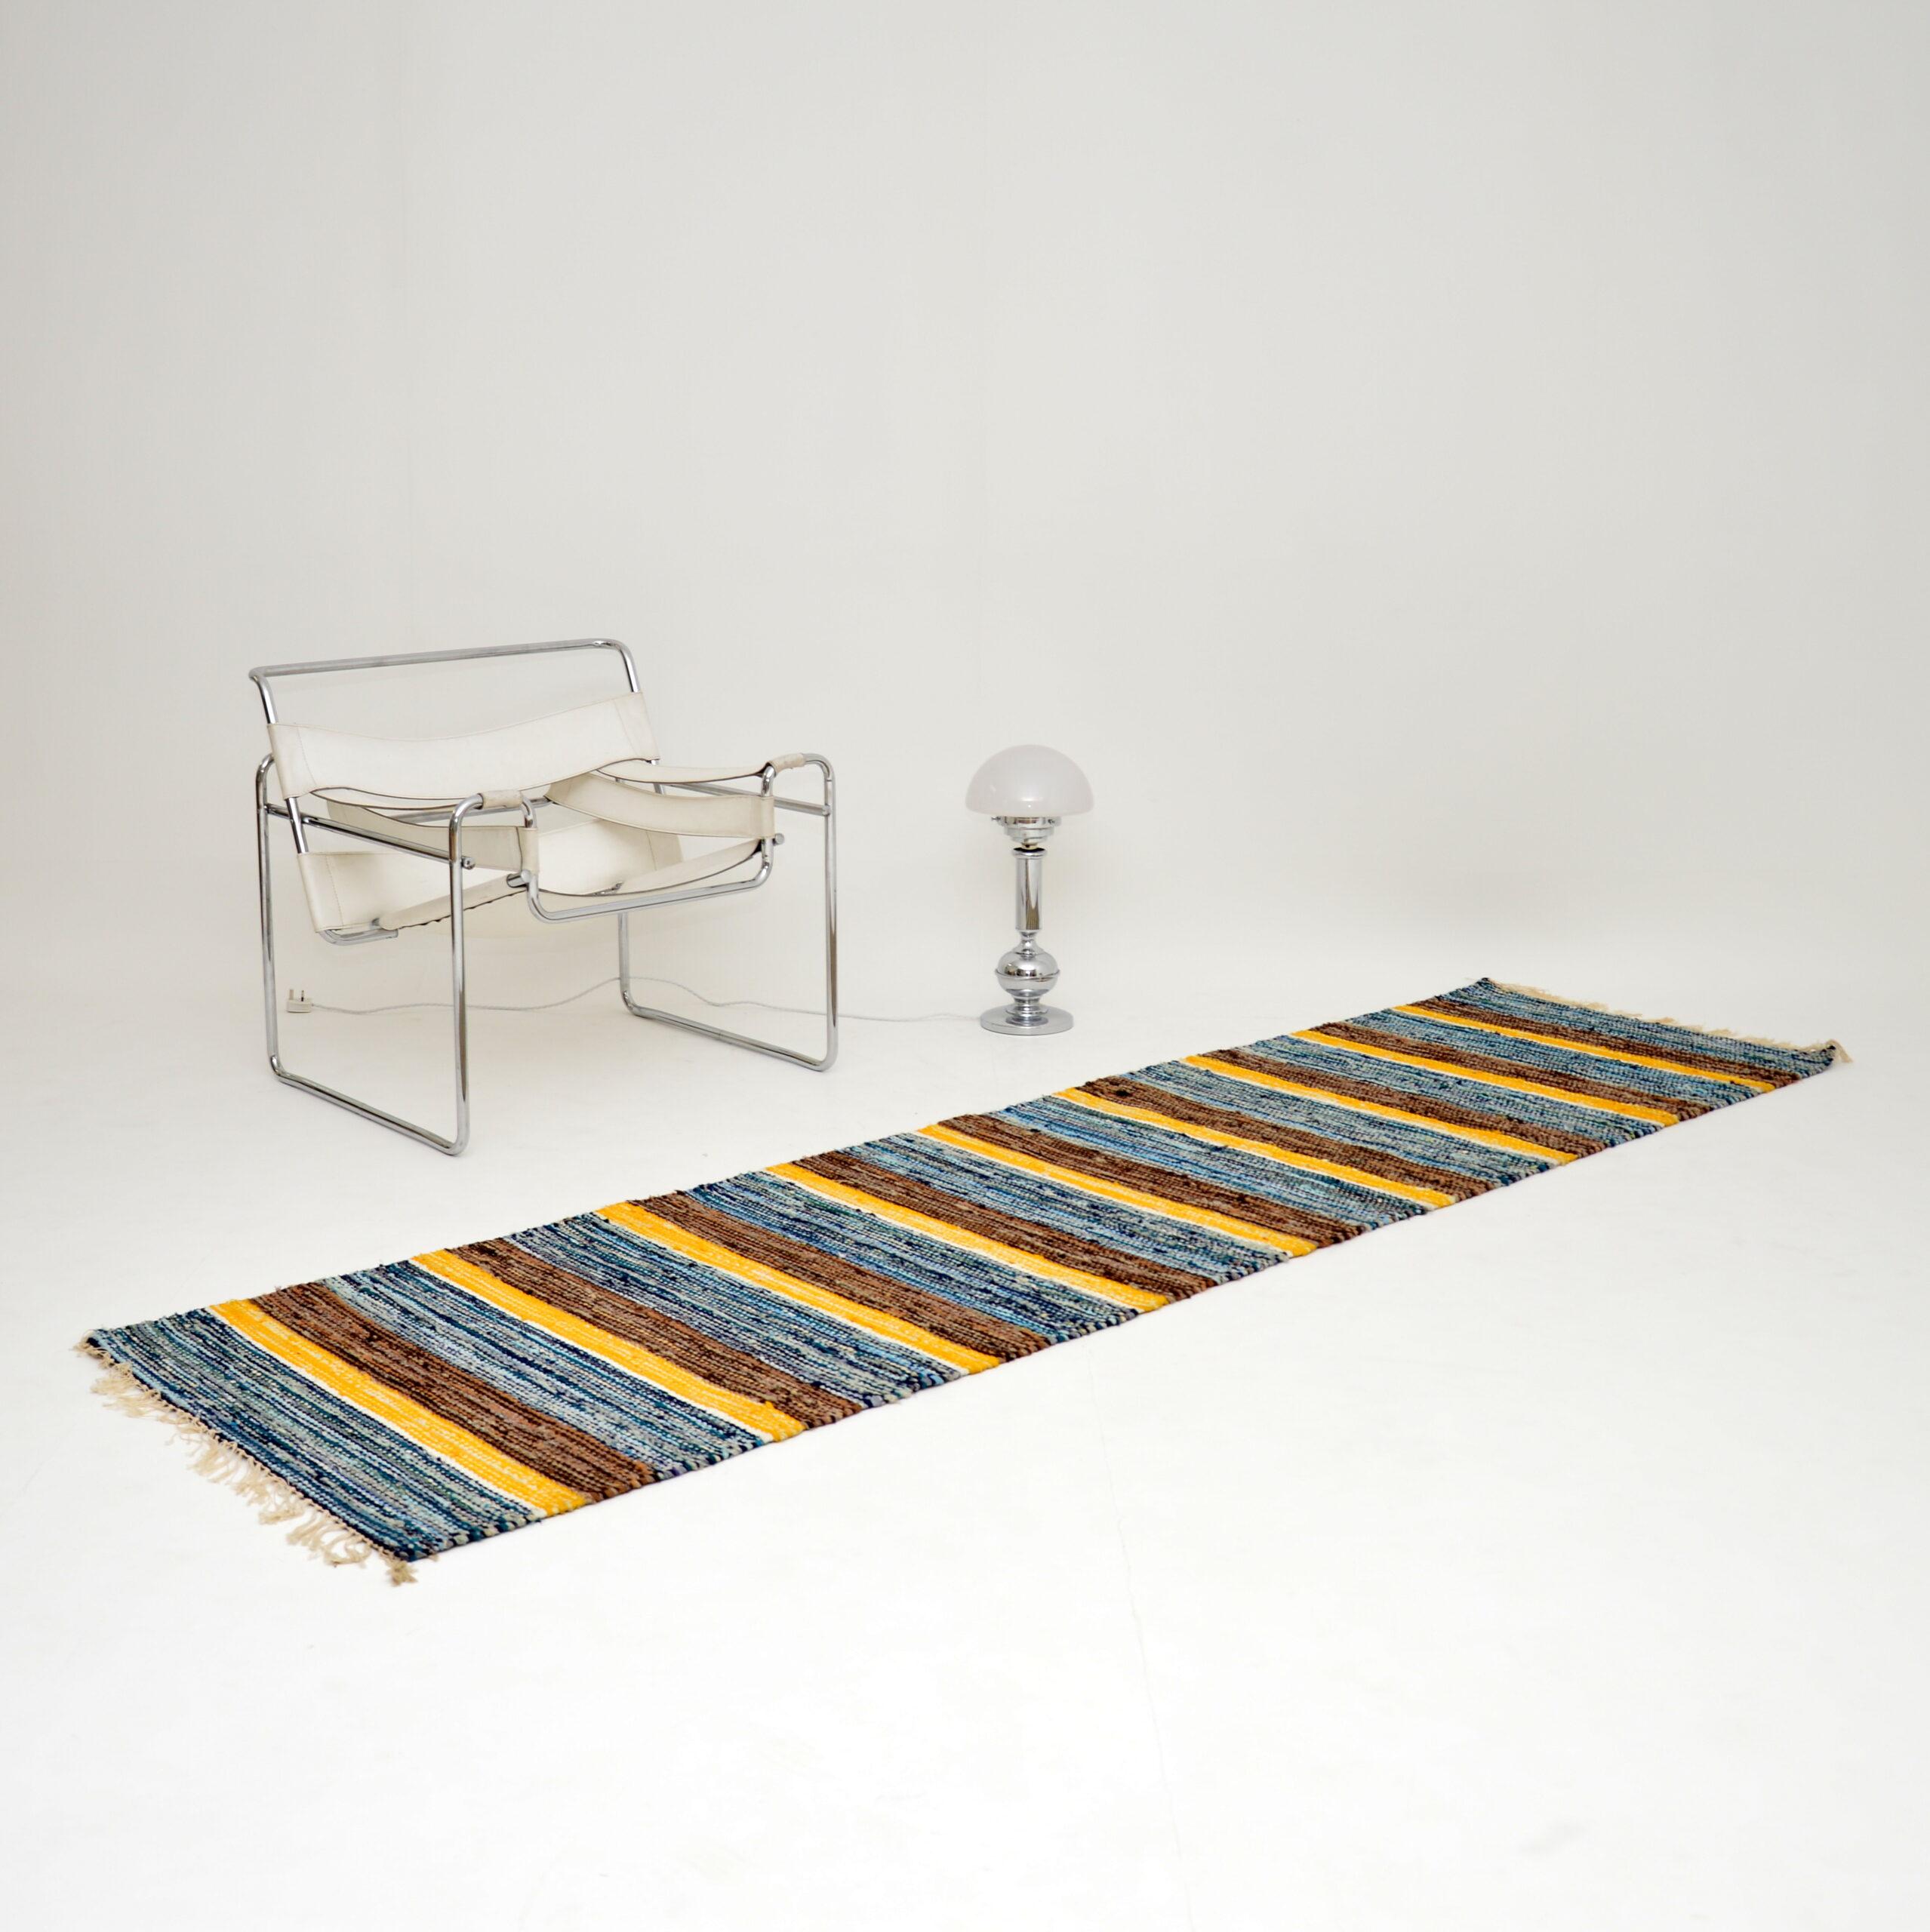 A beautiful vintage rug, this was made in Finland in the 1960s. It is very long and narrow, perfect for an entry / passage way. It’s woven from high quality wool and has many beautiful colours. This is in very good condition, with just some minor